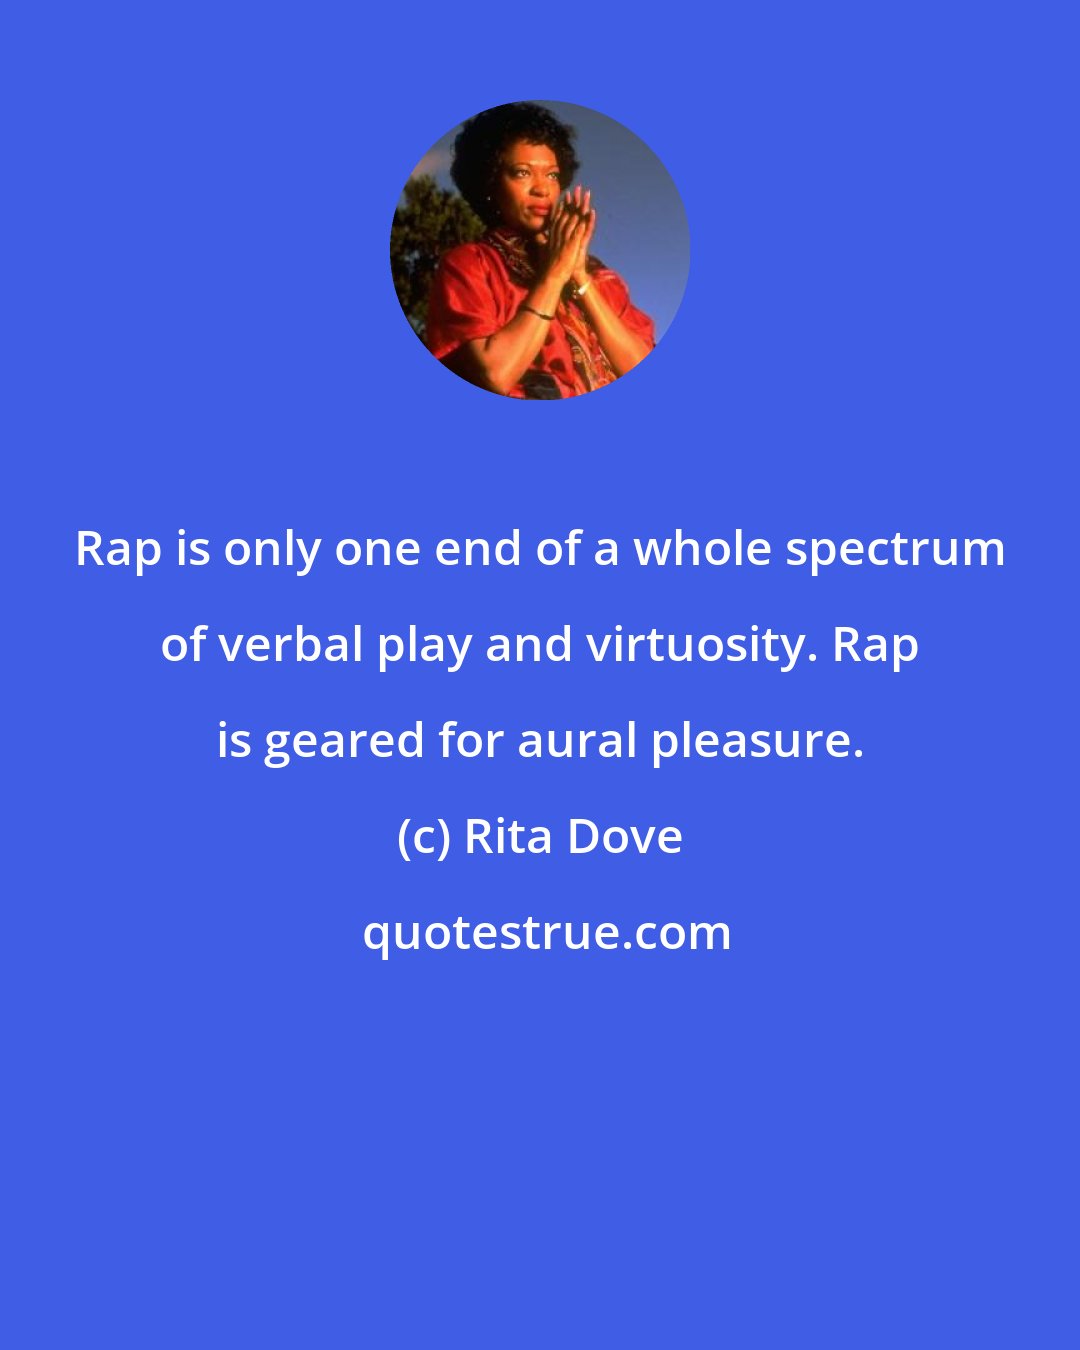 Rita Dove: Rap is only one end of a whole spectrum of verbal play and virtuosity. Rap is geared for aural pleasure.